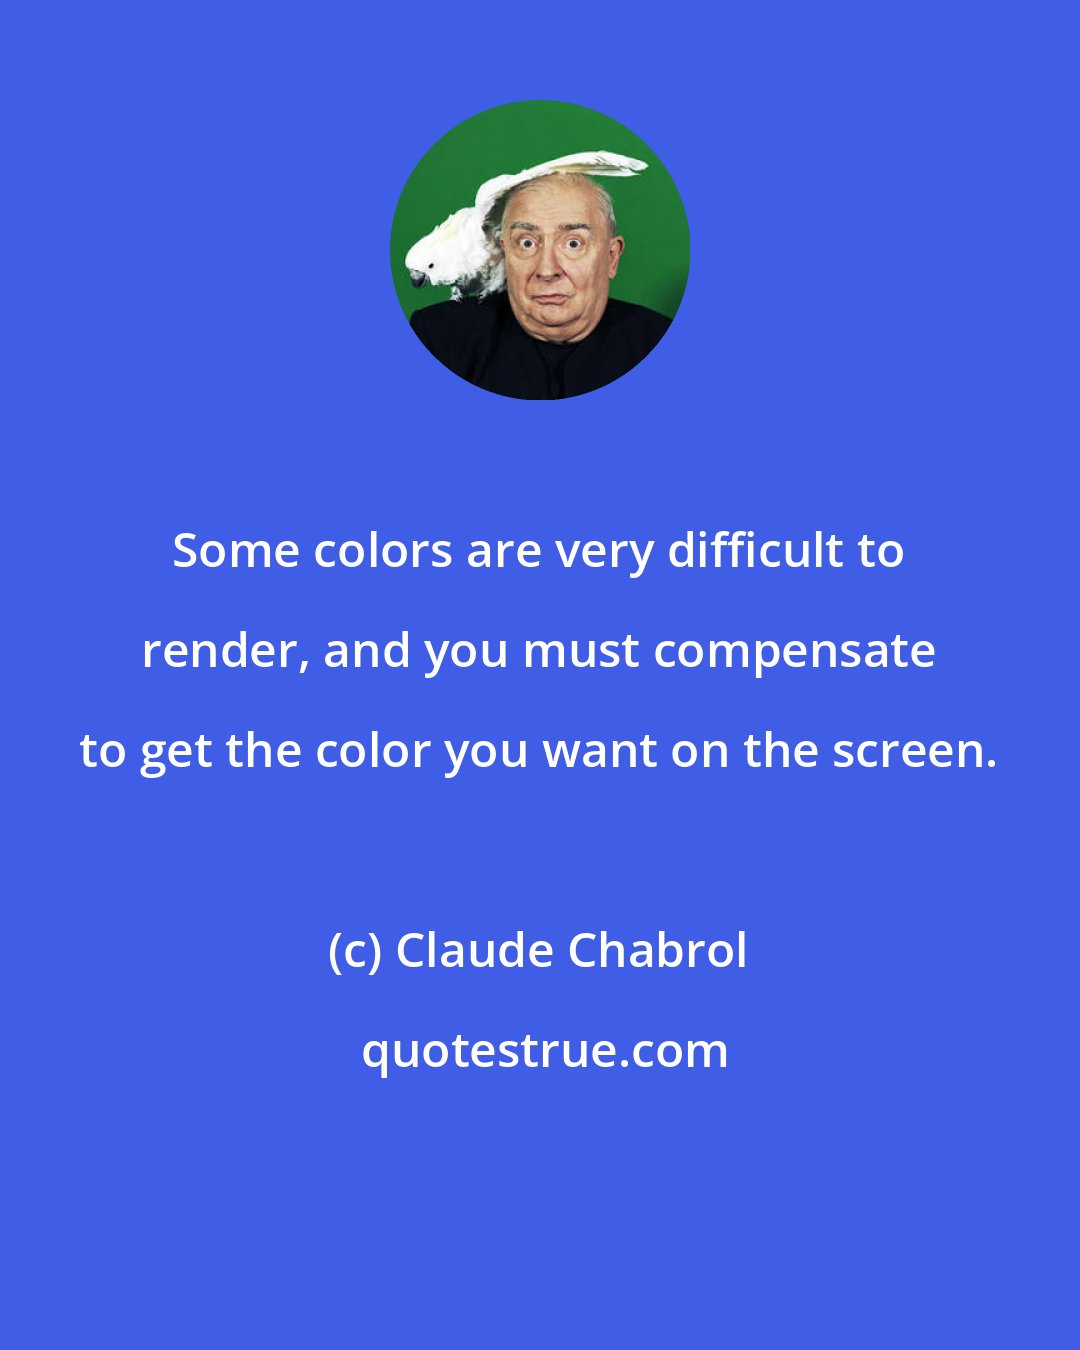 Claude Chabrol: Some colors are very difficult to render, and you must compensate to get the color you want on the screen.